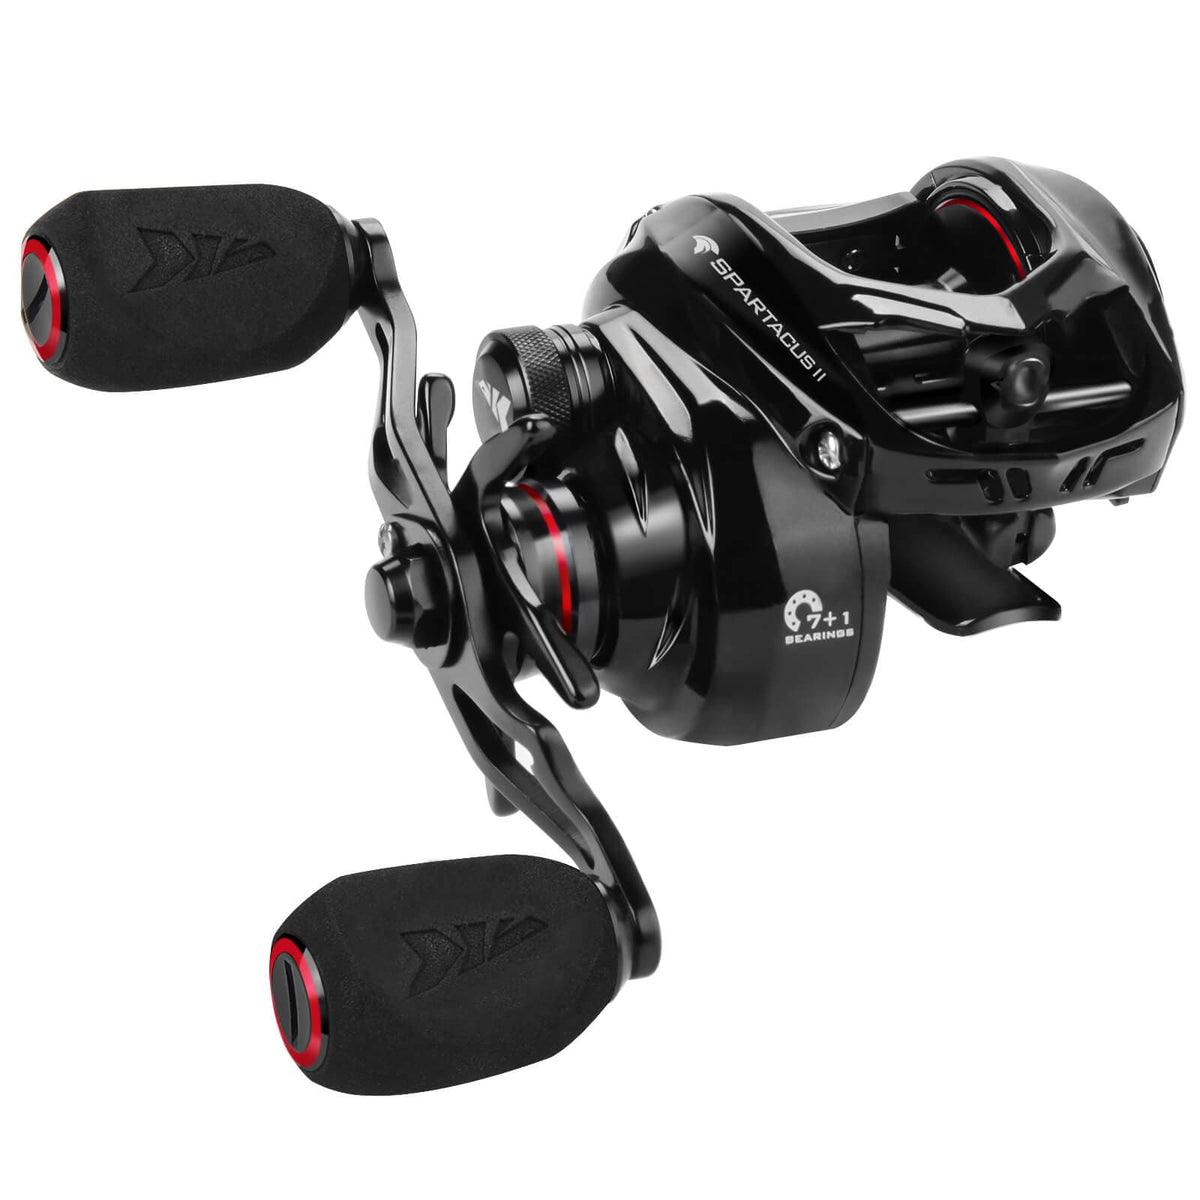 Kast King Sparticus 2 Reel Review #fishingfun #fishcontent